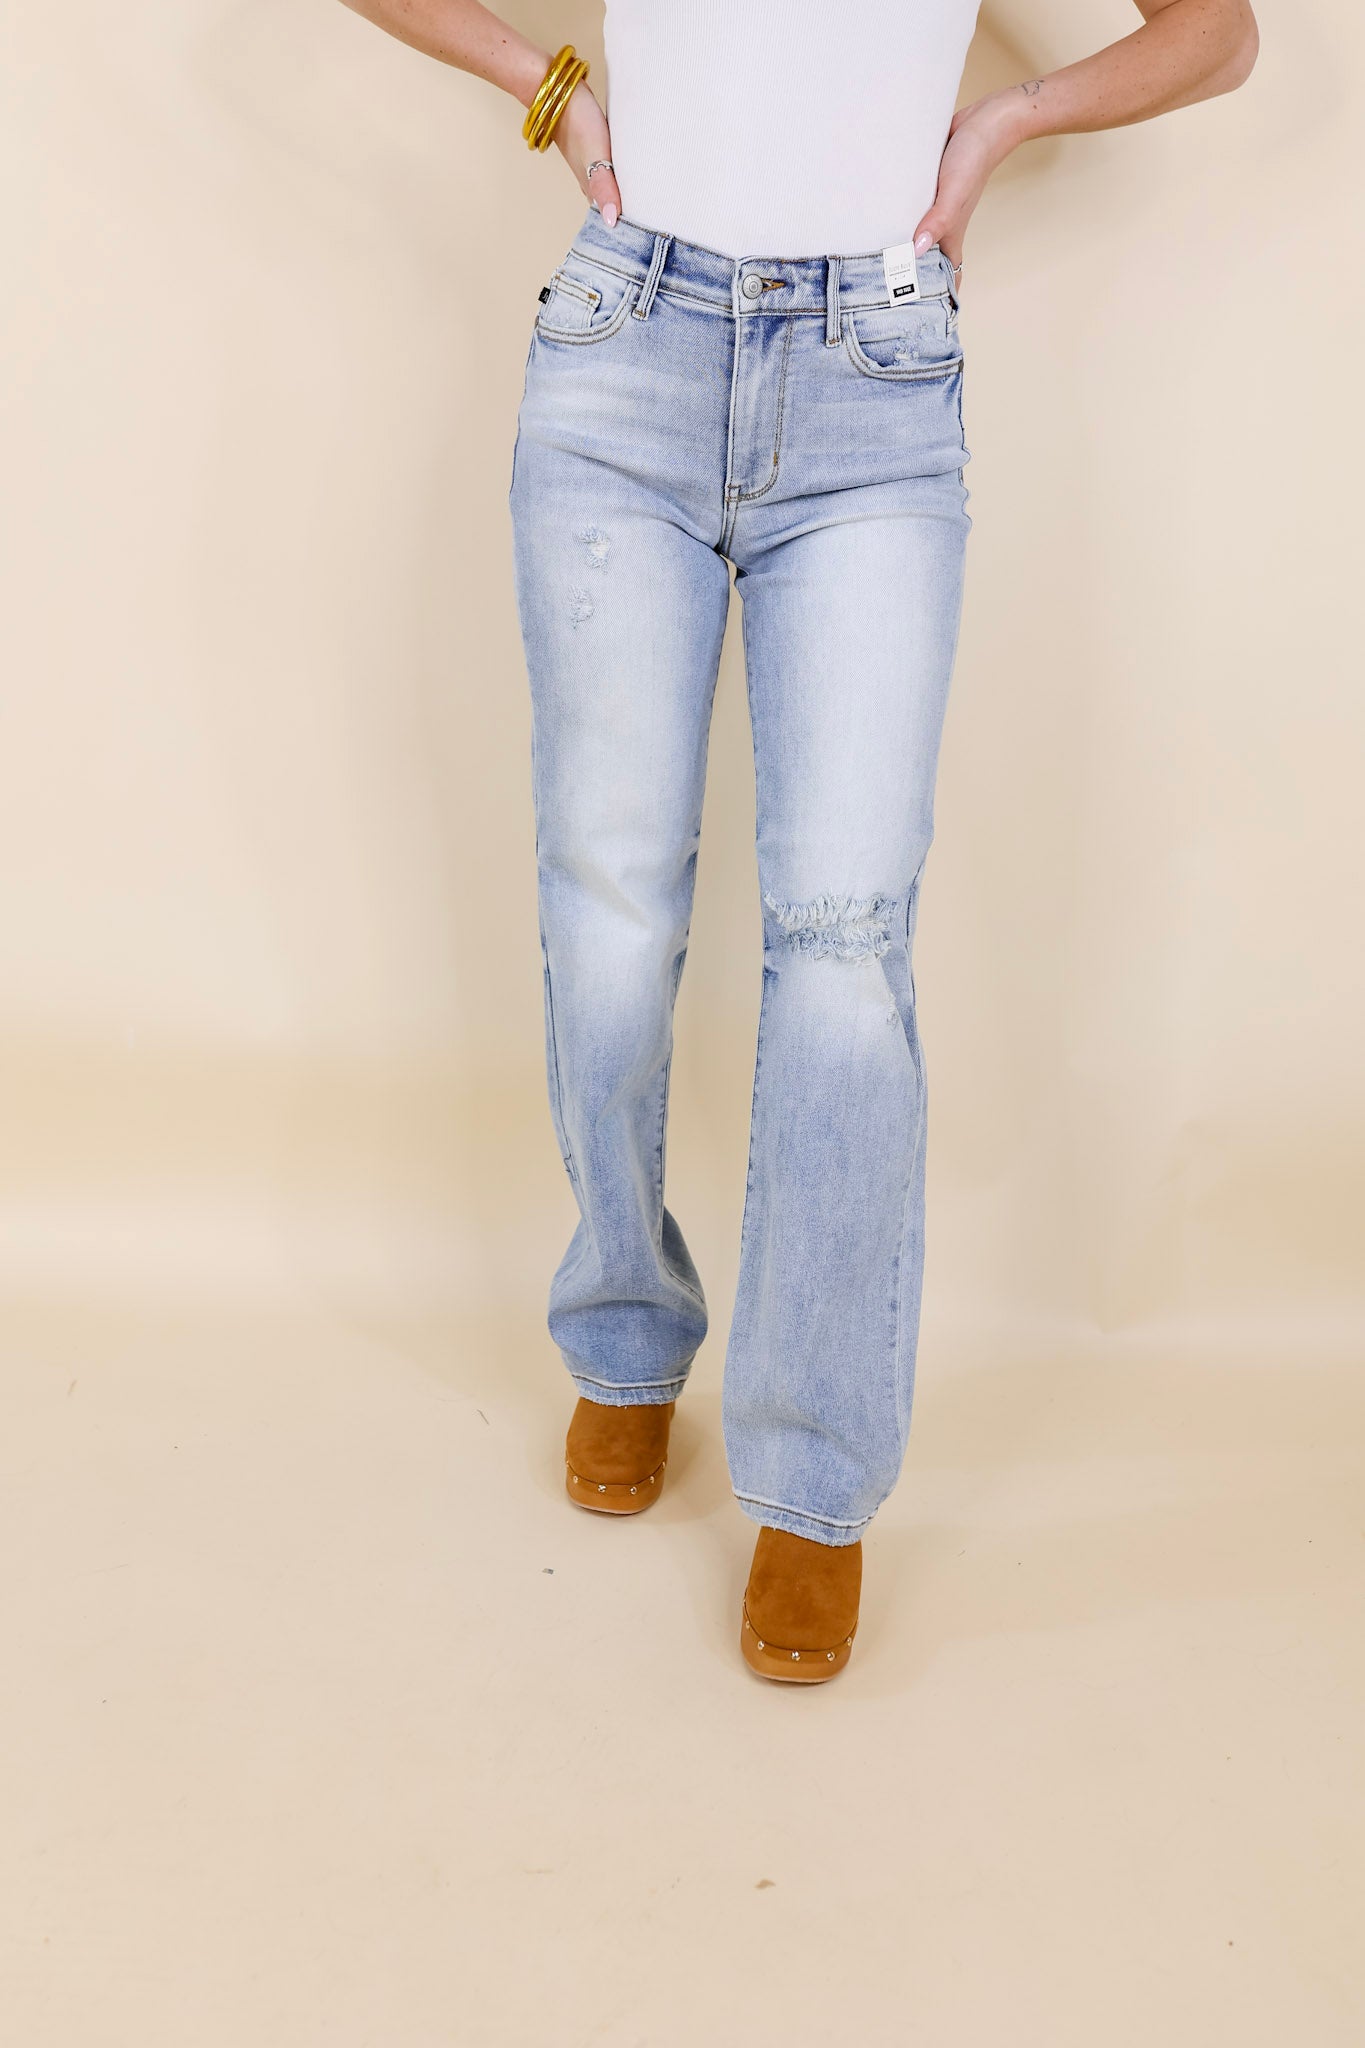 Judy Blue | Invitation Only Destroy Knee Dad Jeans in Light Wash - Giddy Up Glamour Boutique